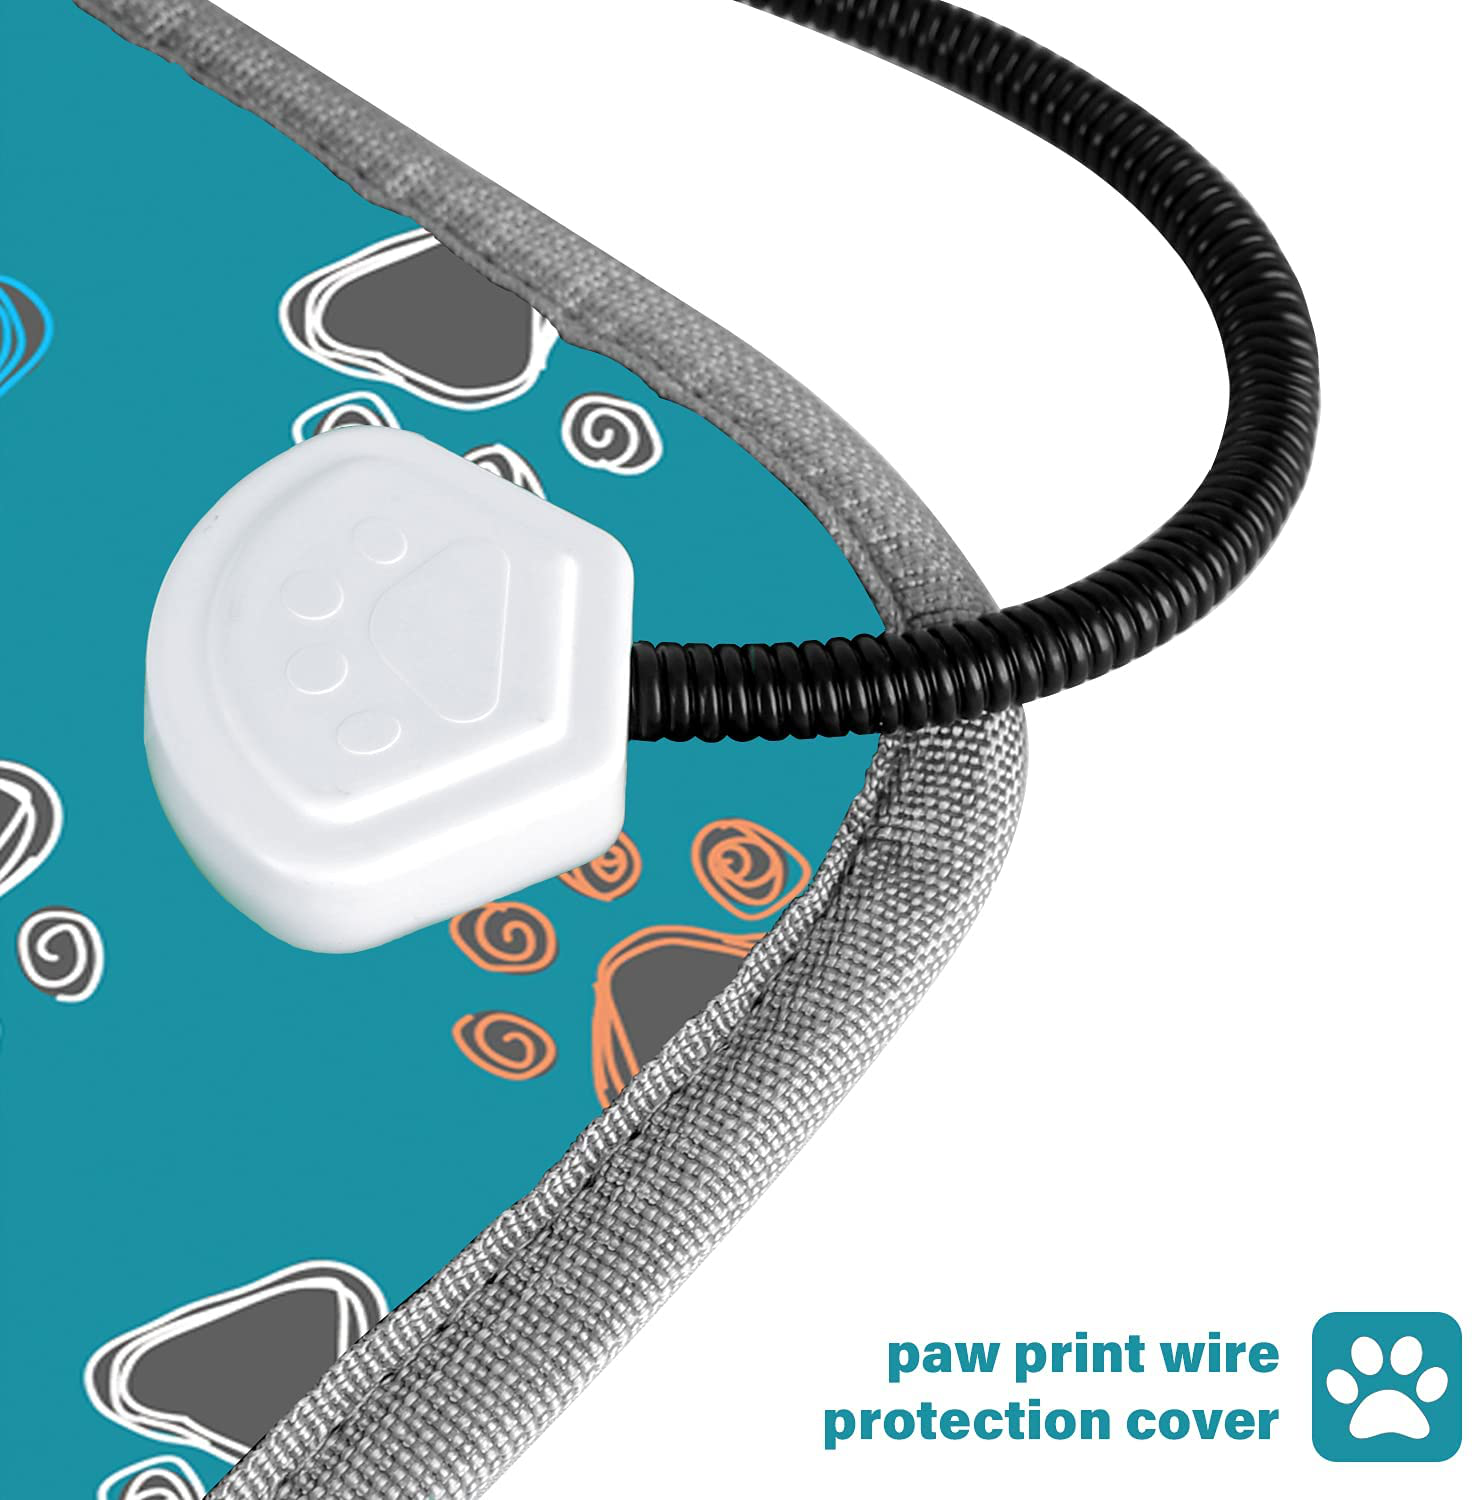 Furrybaby Pet Heating Pad, Waterproof Dog Heating Pad Mat for Cat with 5 Level Timer and Temperature, Pet Heated Warming Pad with Durable Anti-Bite Tube Indoor for Puppies Dogs Cats Animals & Pet Supplies > Pet Supplies > Cat Supplies > Cat Beds furrybaby   